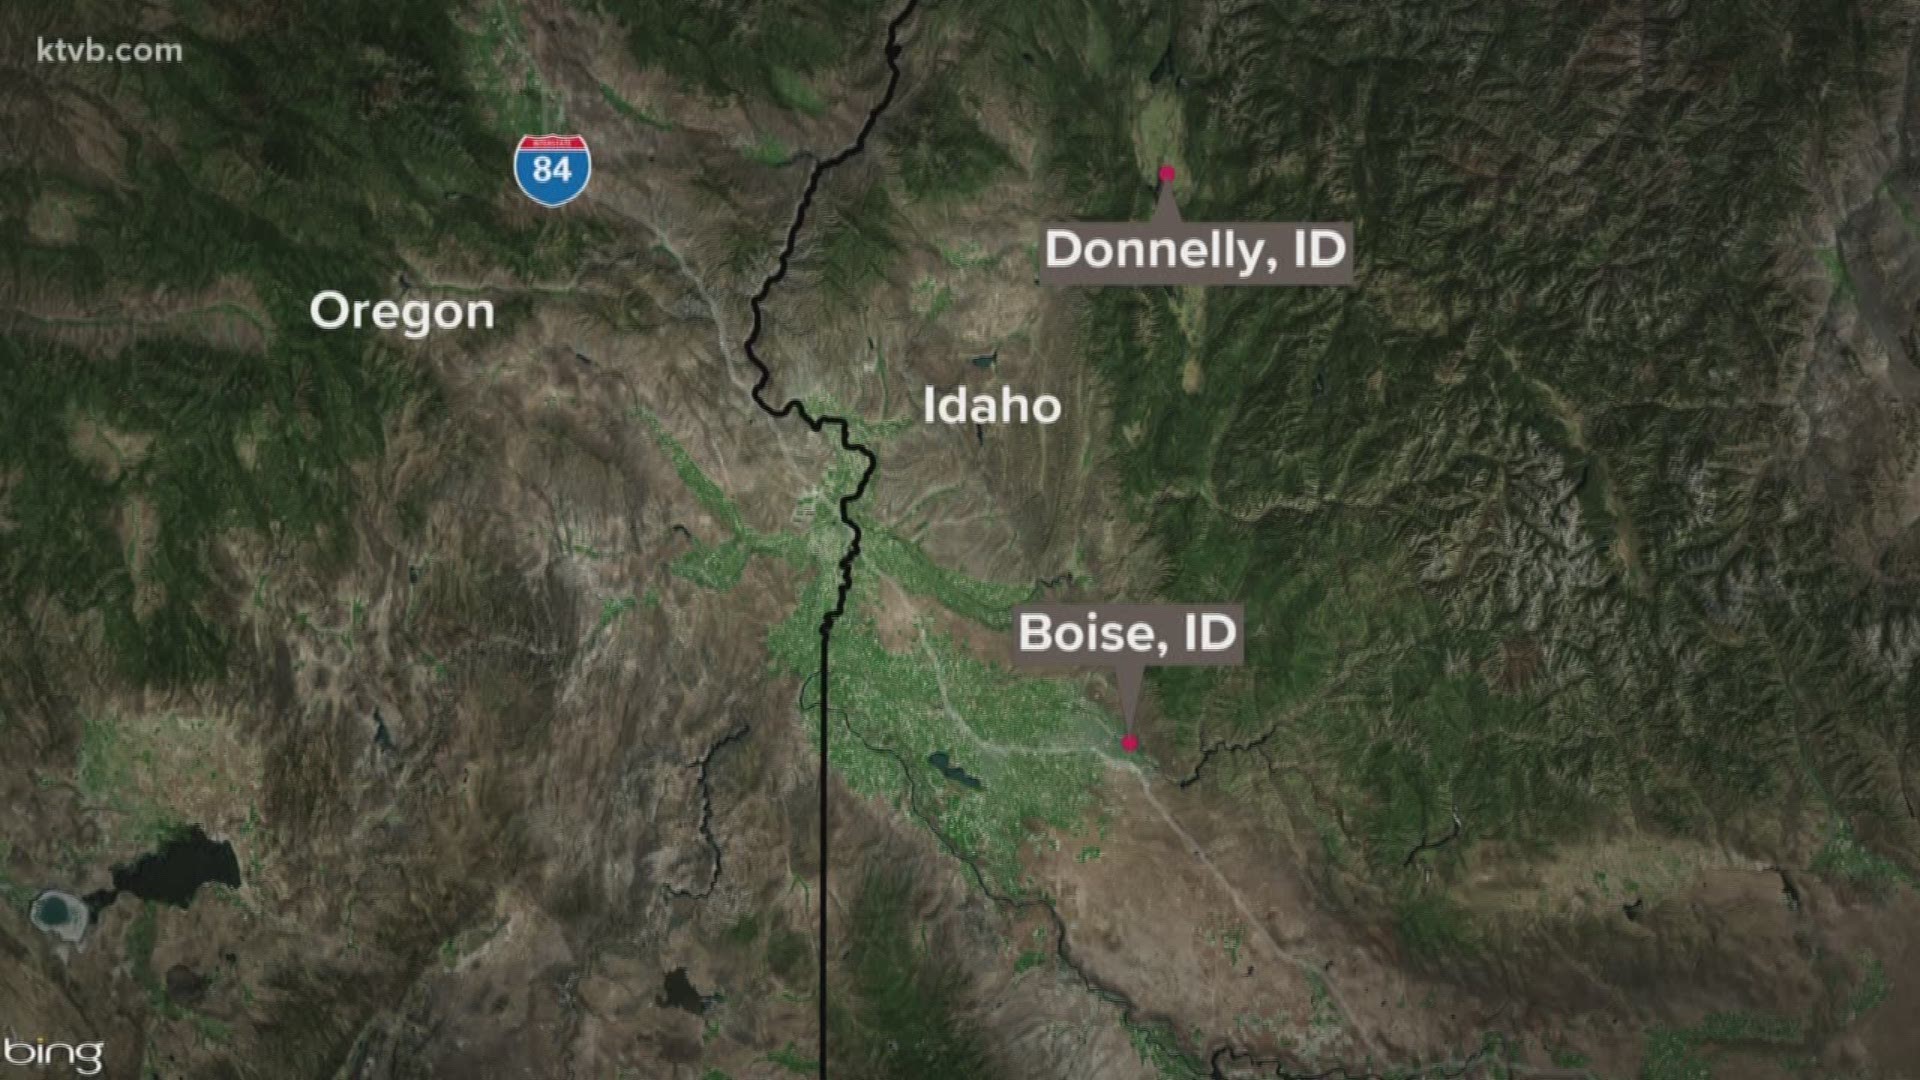 Idaho State Police say 27-year-old Kenneth Fourtner, from Boise, tried to pass another vehicle on the snow-covered highway.